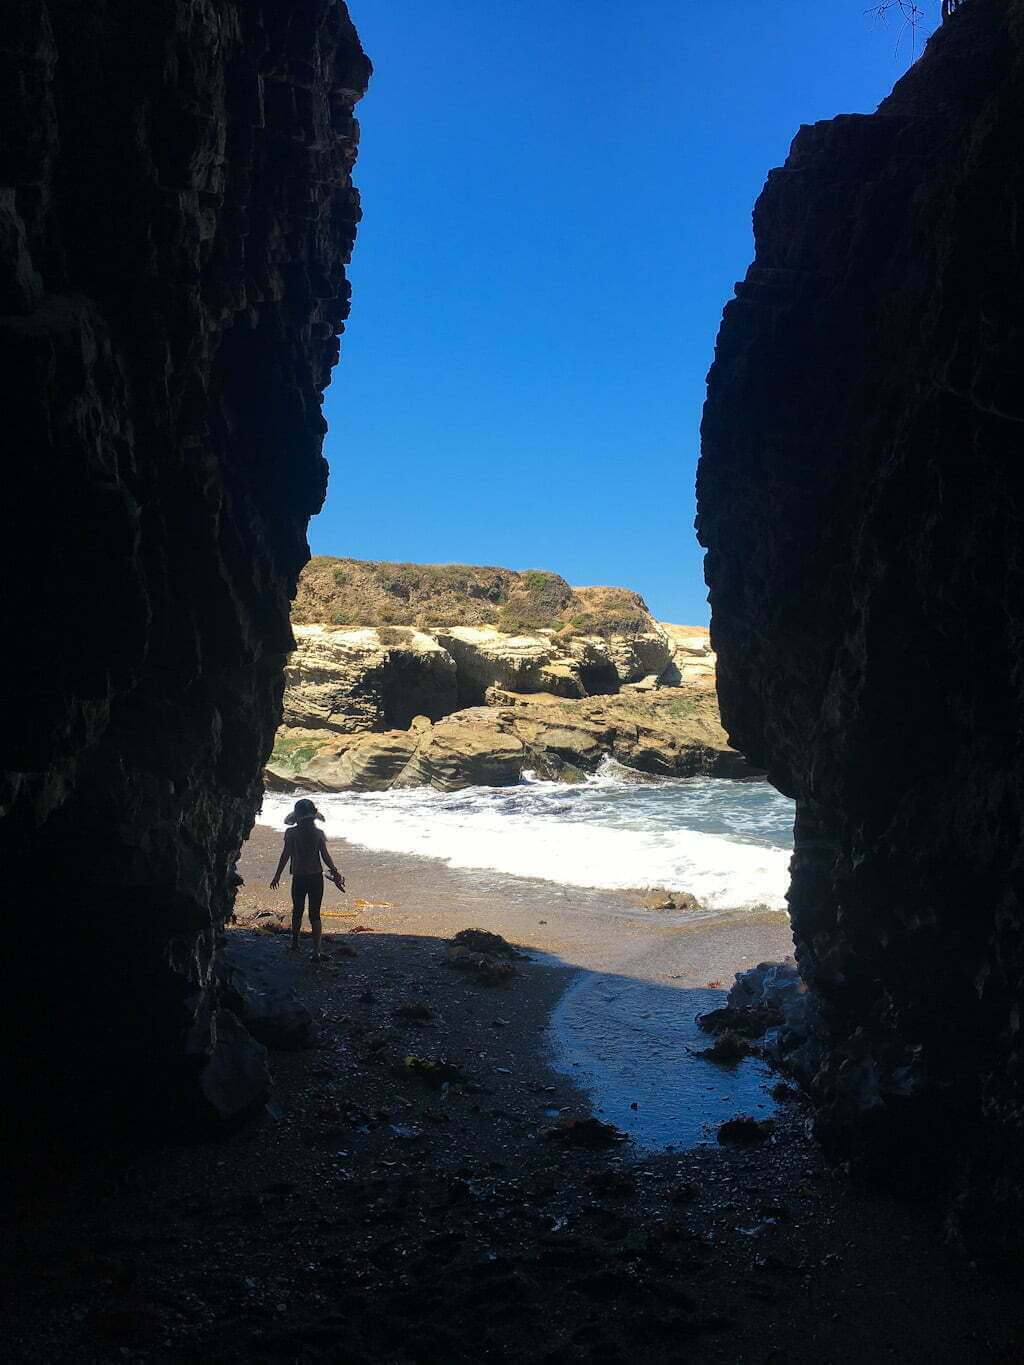 view out of sea cave towards beach with child's silhouette and rocks